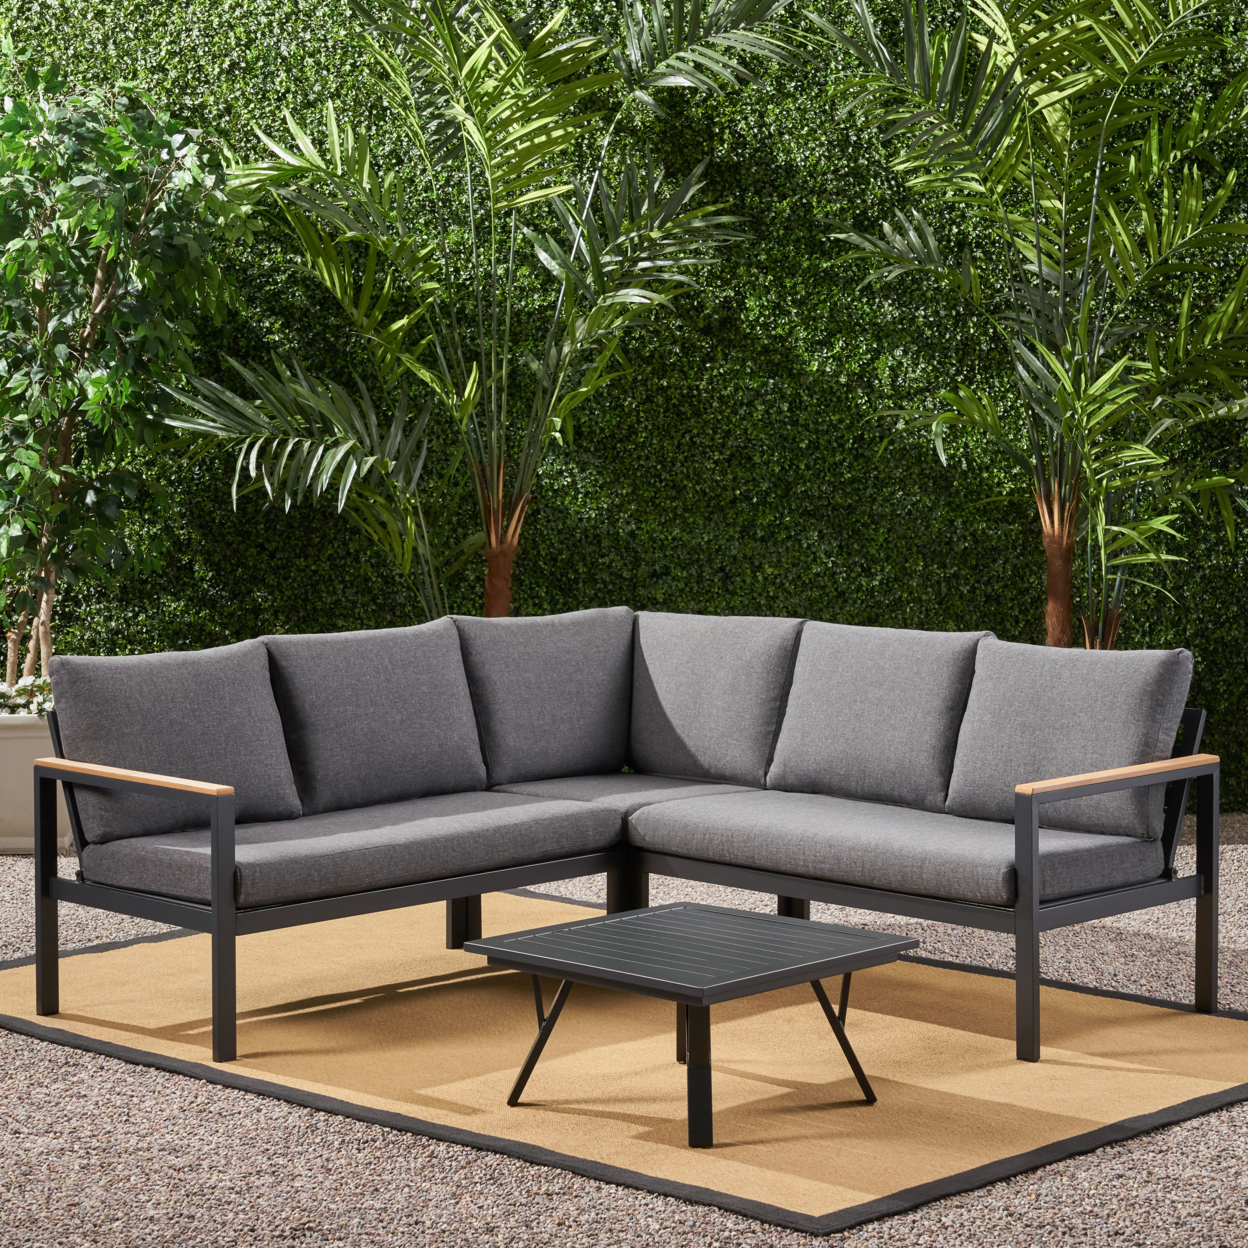 Jessica Outdoor Aluminum V-Shaped Sofa Set With Faux Wood Accents